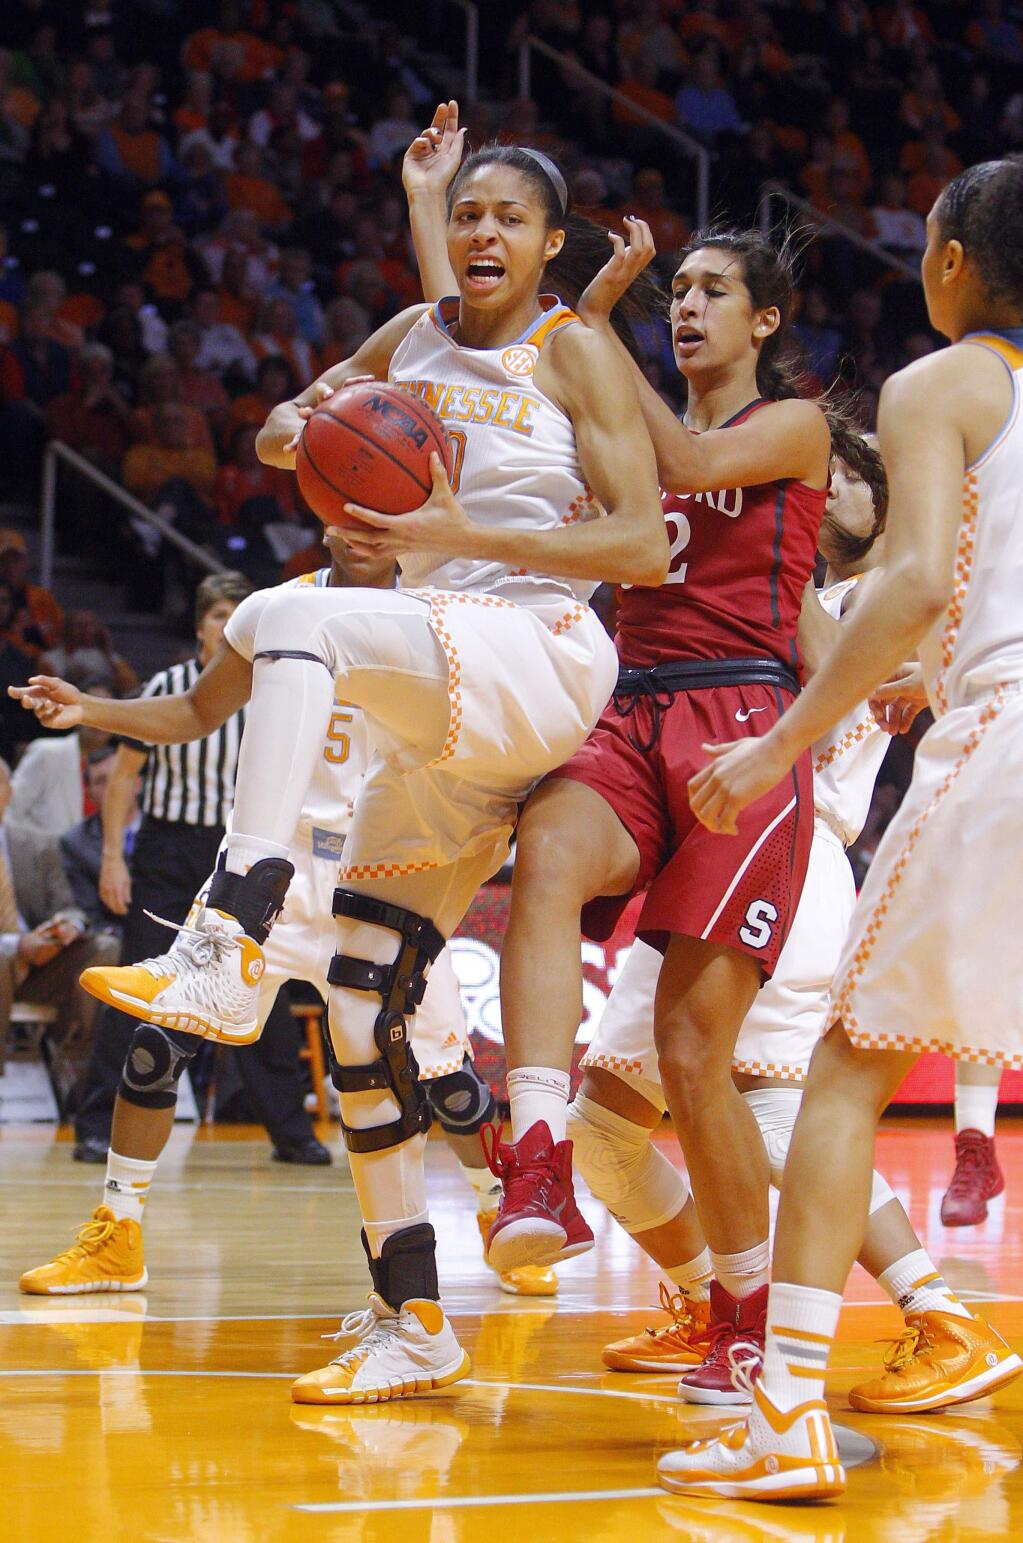 Tennessee center Isabelle Harrison (20) grabs a rebound away from Stanford forward Kailee Johnson (32) in the first half of an NCAA college basketball game, Saturday, Dec. 20, 2014, in Knoxville, Tenn. (AP Photo/Wade Payne)